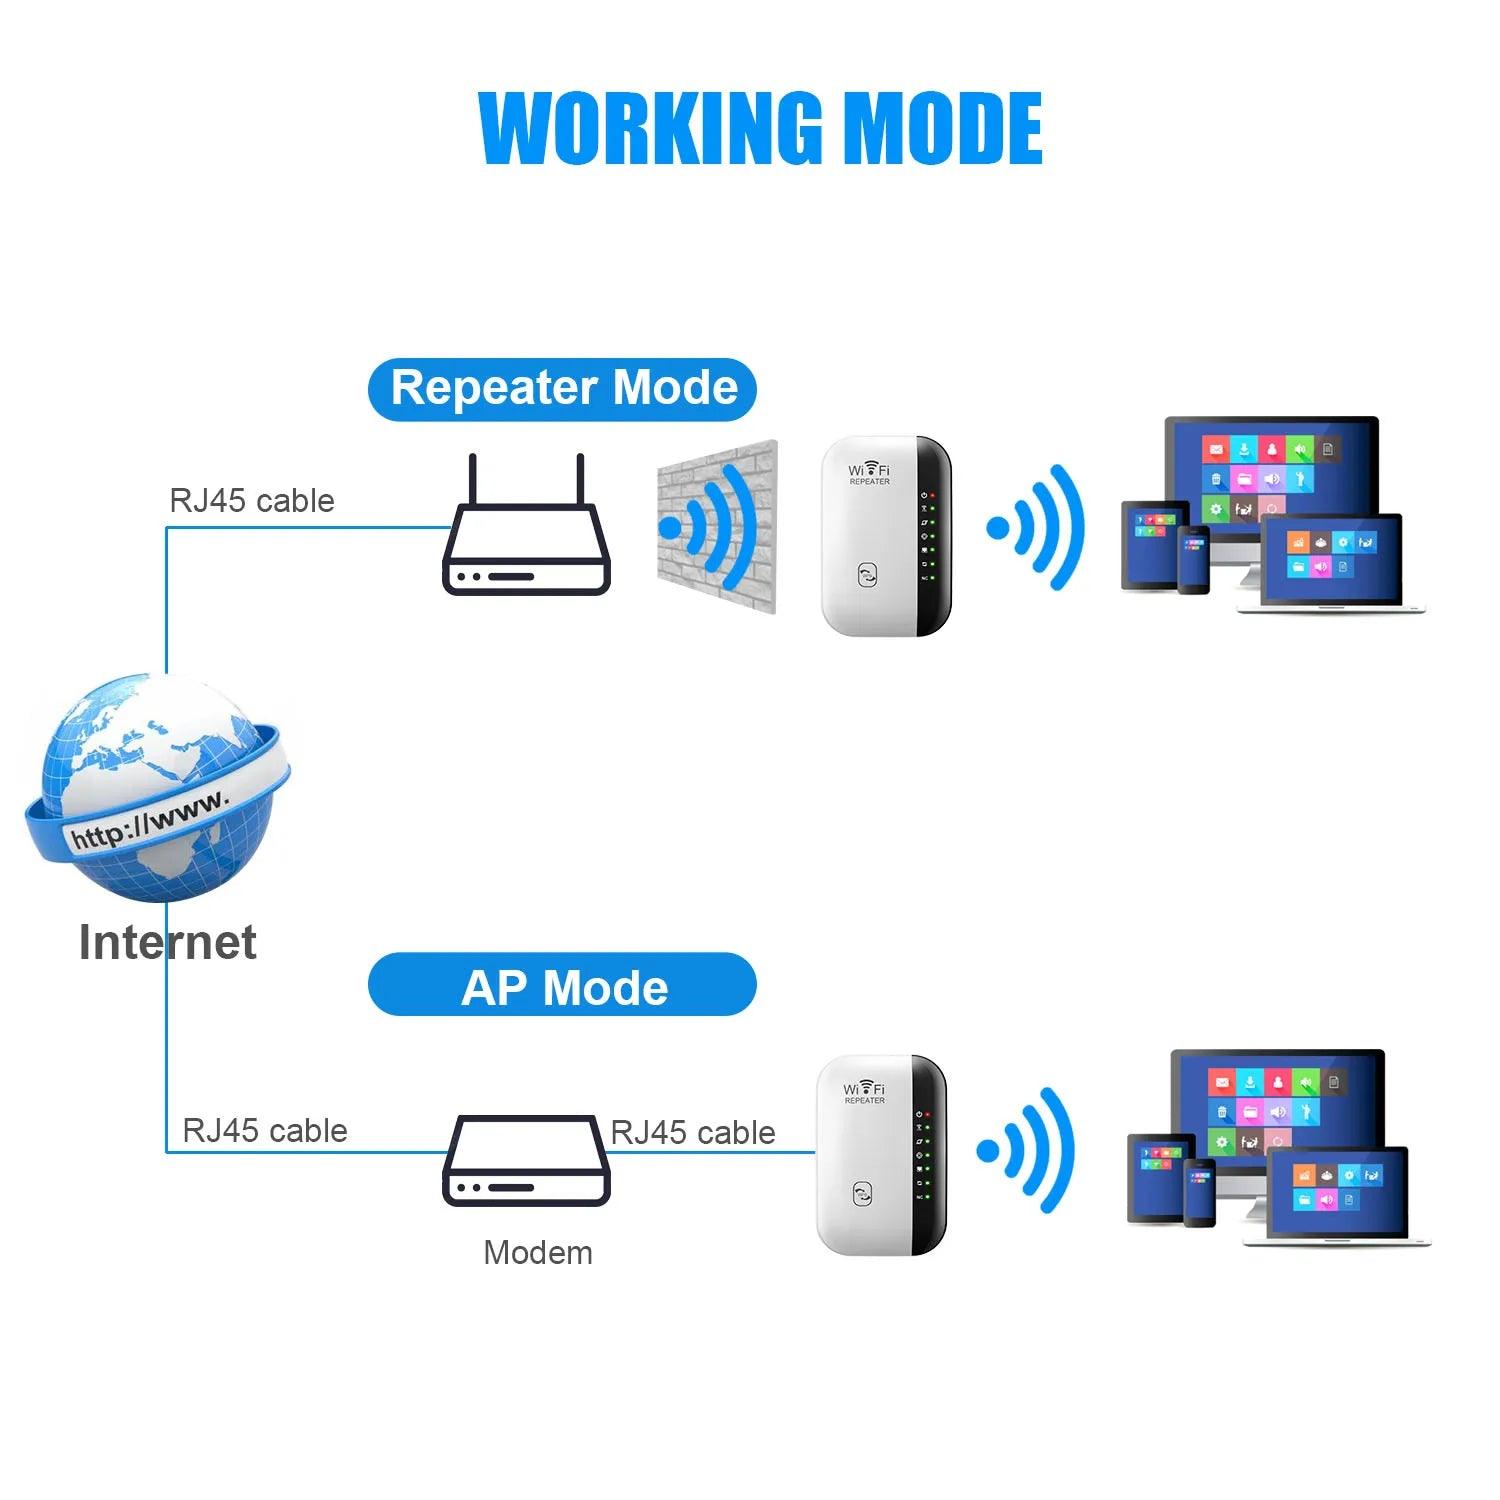 Wi-Fi Boost 300Mbps Wireless Repeater with Secure Connection and High Transmission Rate  ourlum.com   